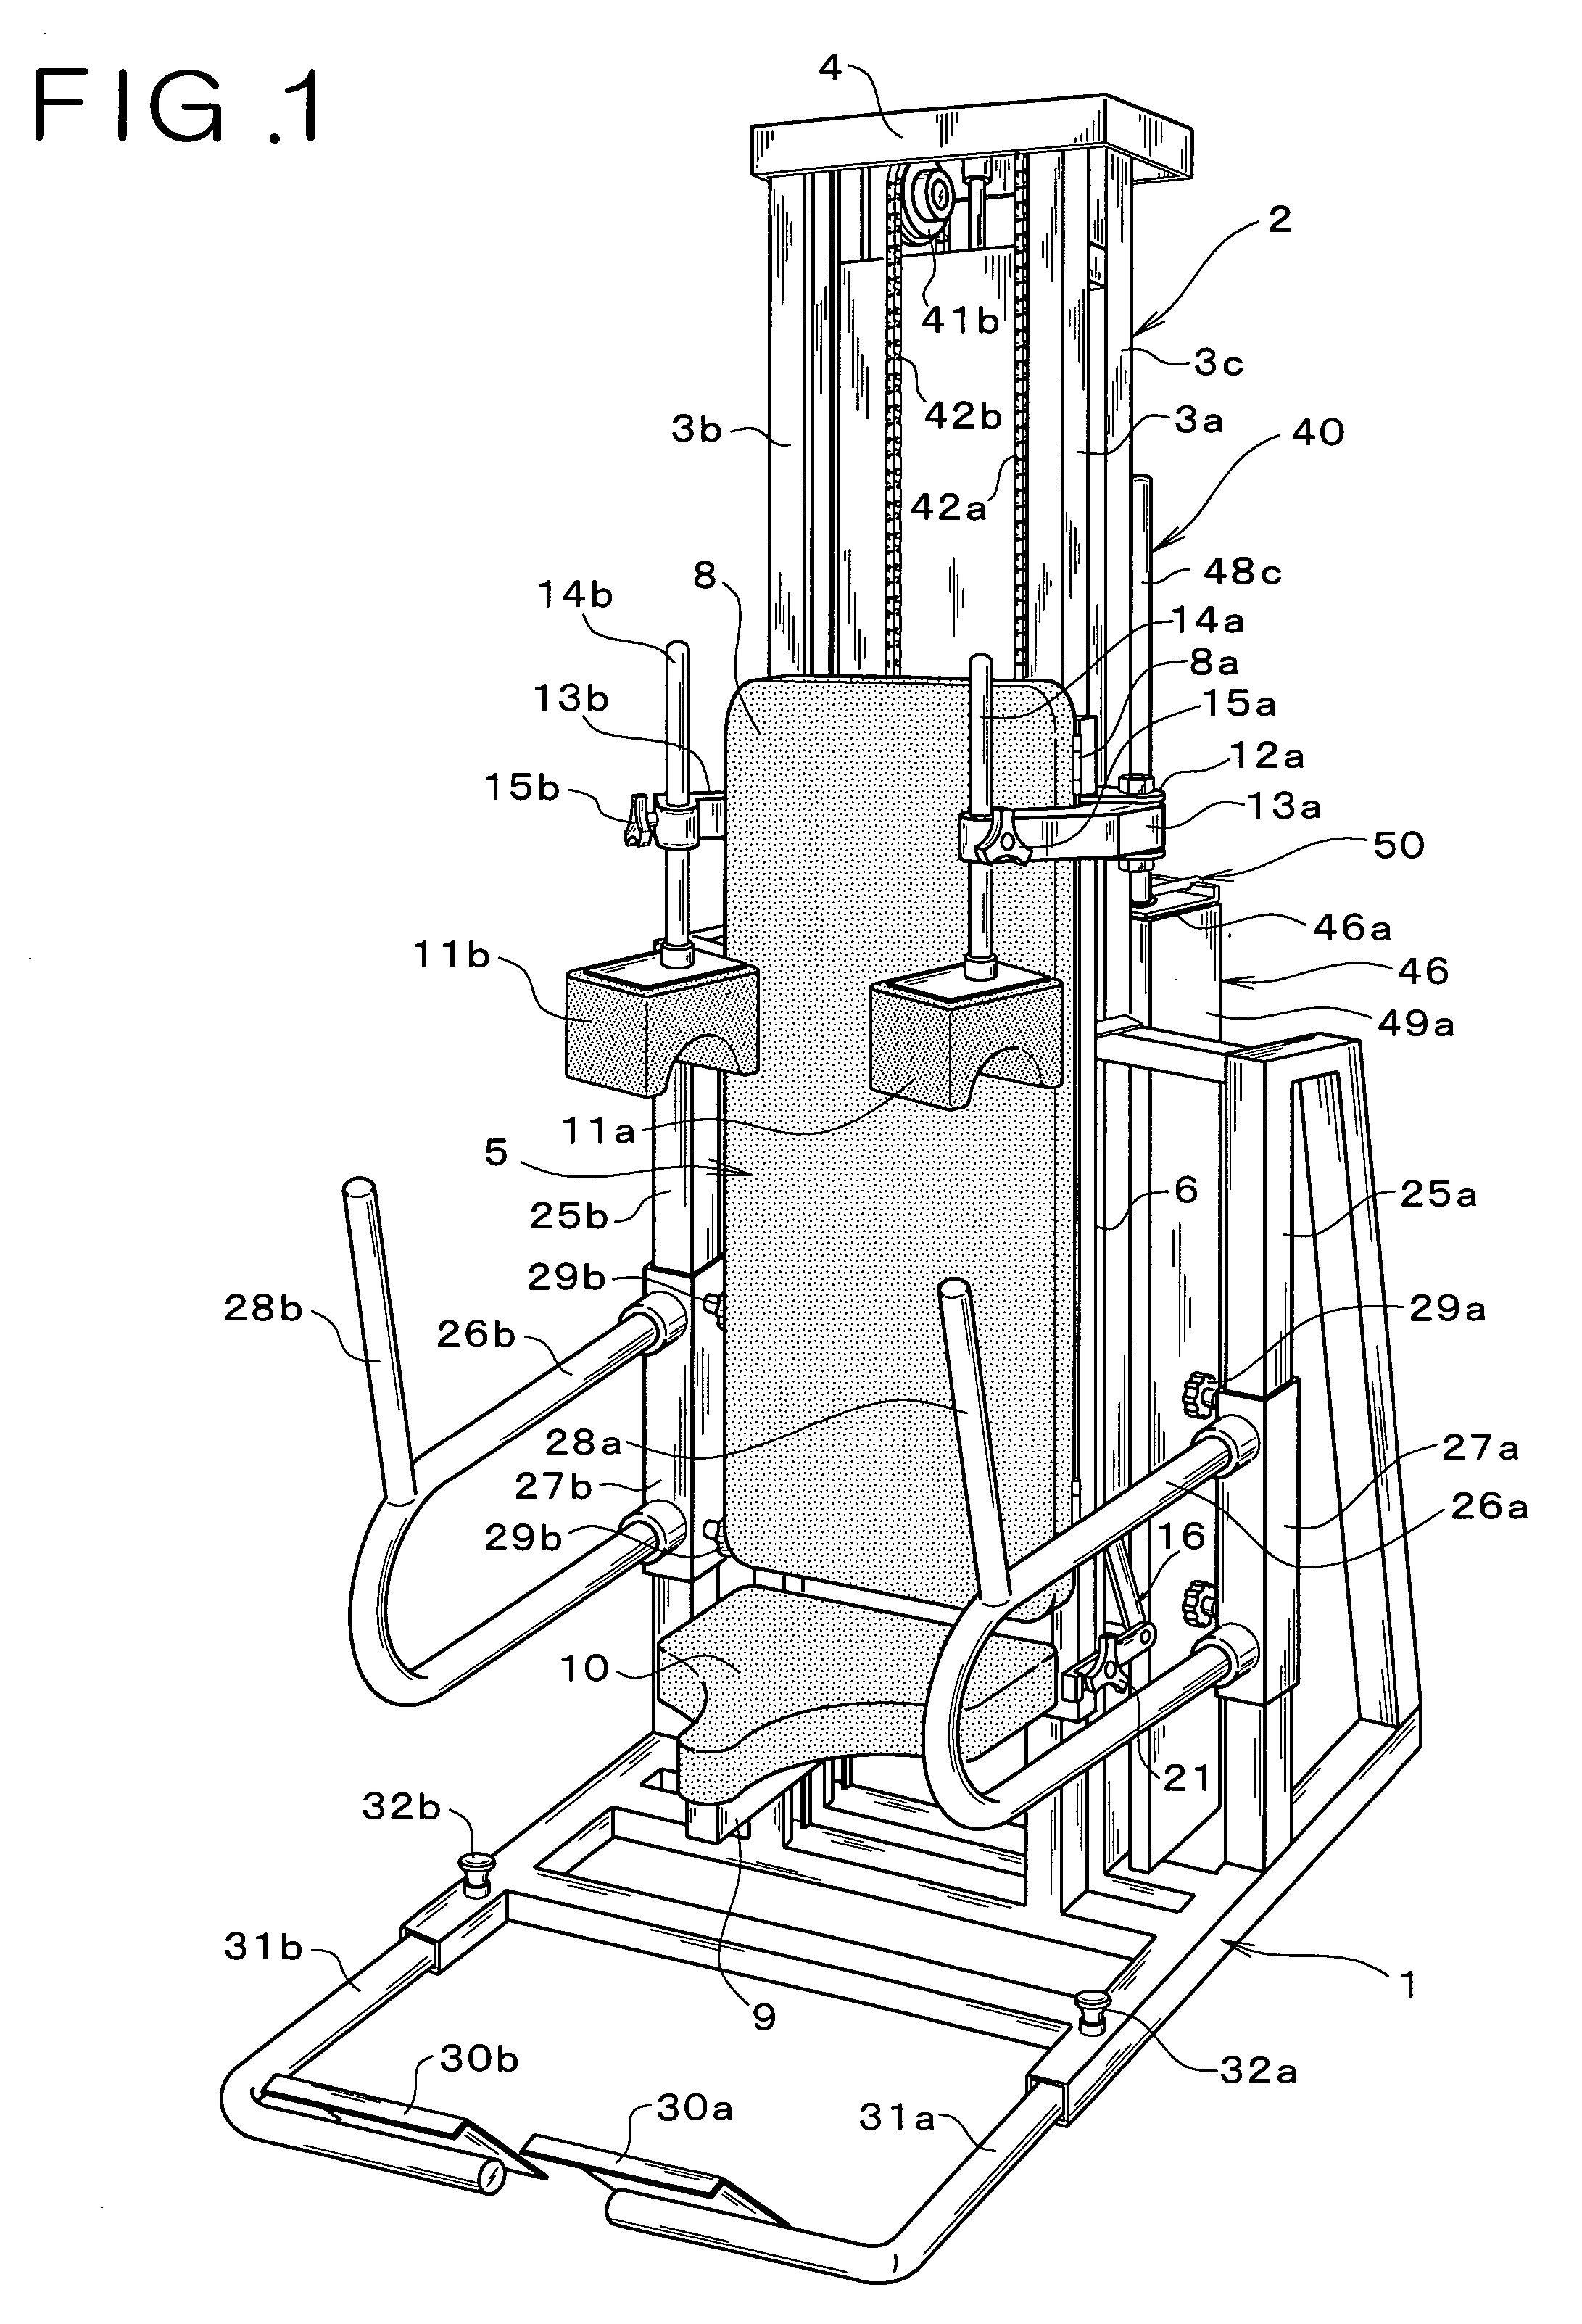 Inferior limb muscle force training apparatus